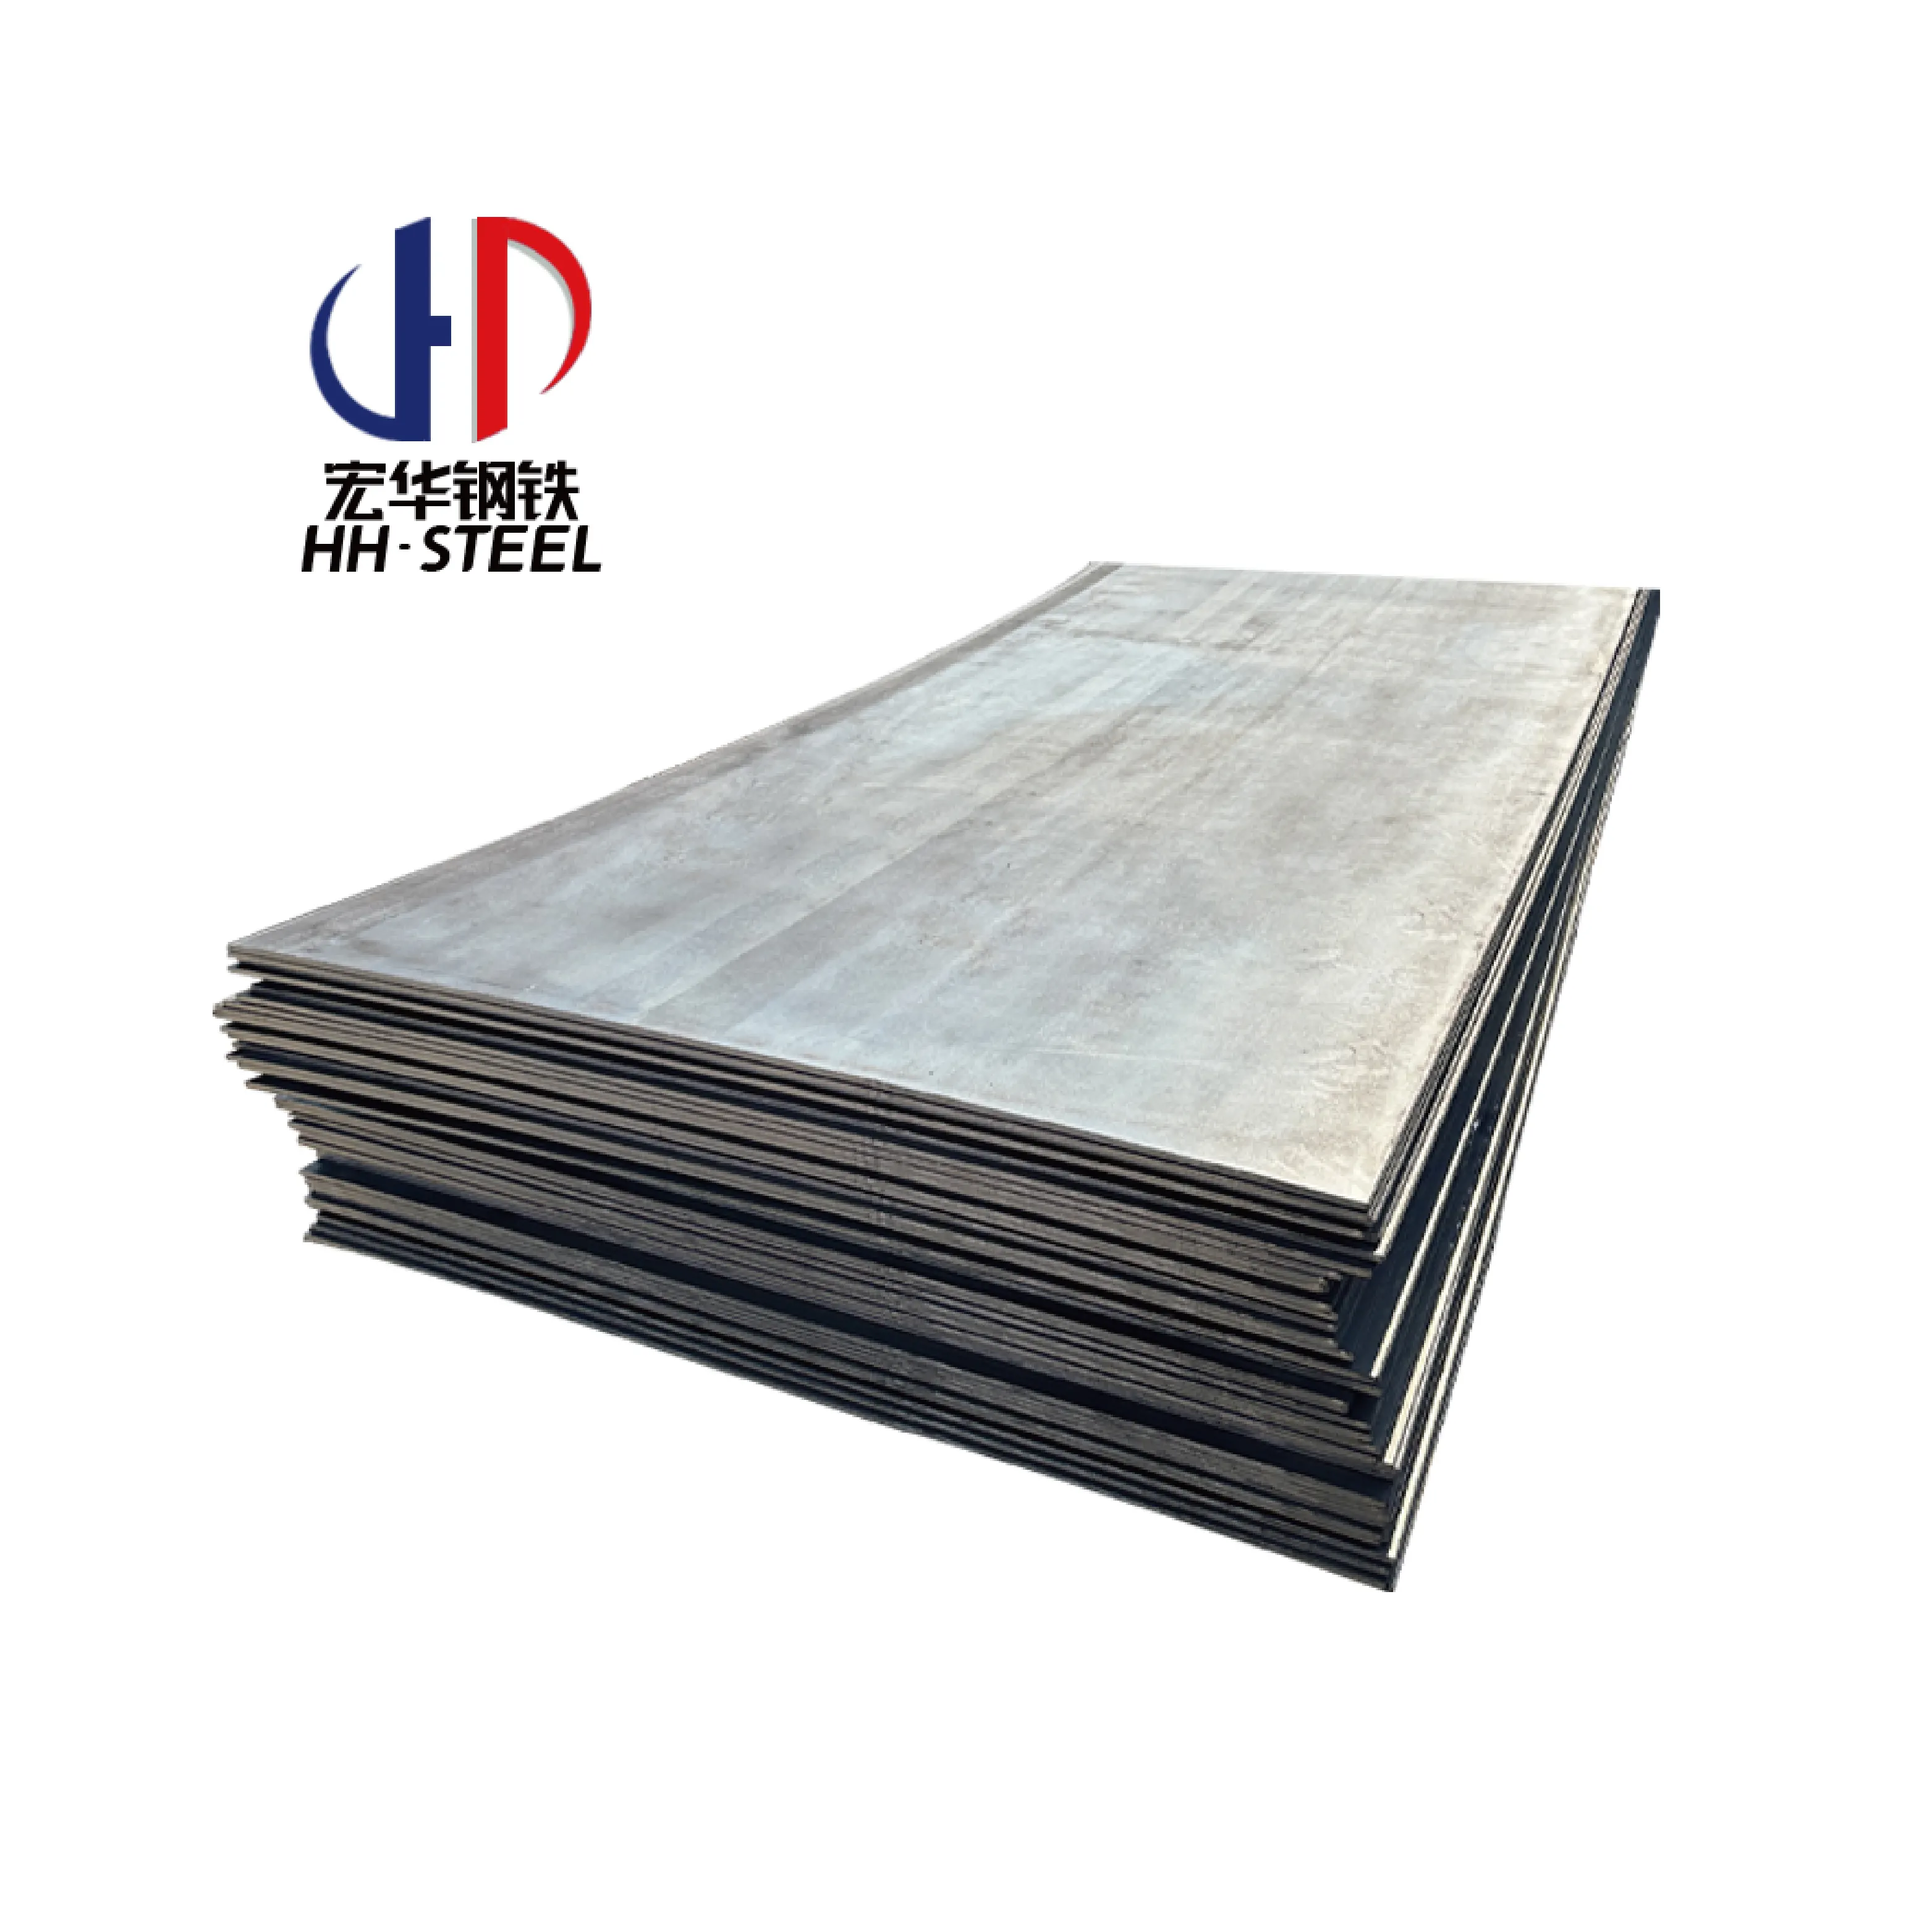 Factory Price A36 Q235 Q345 Ss400 S235jr Q235B Mild Carbon Steel Plates Hot Rolled ASTM ASI BS Standards with Cutting Service